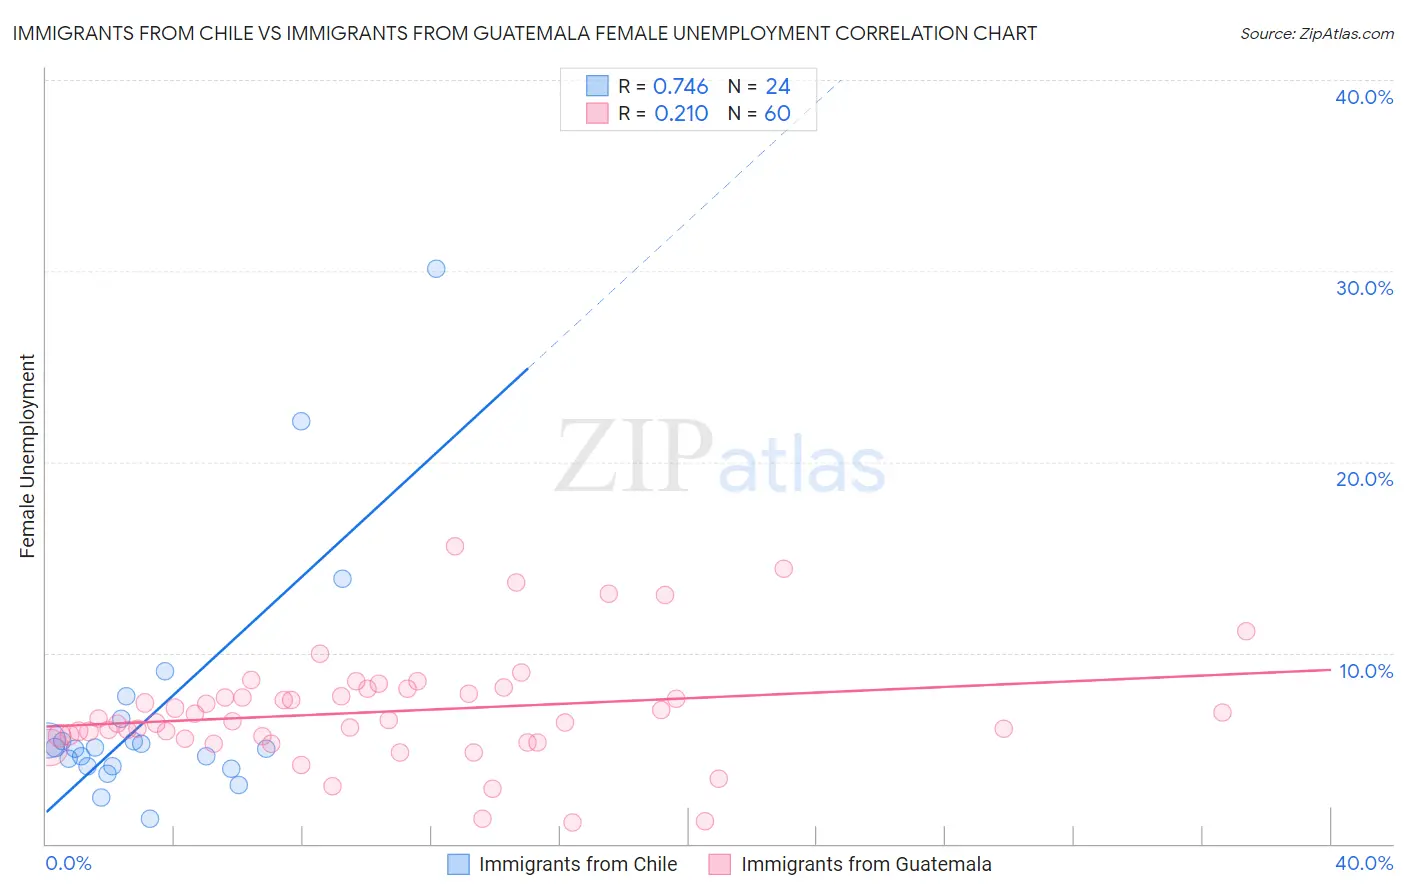 Immigrants from Chile vs Immigrants from Guatemala Female Unemployment